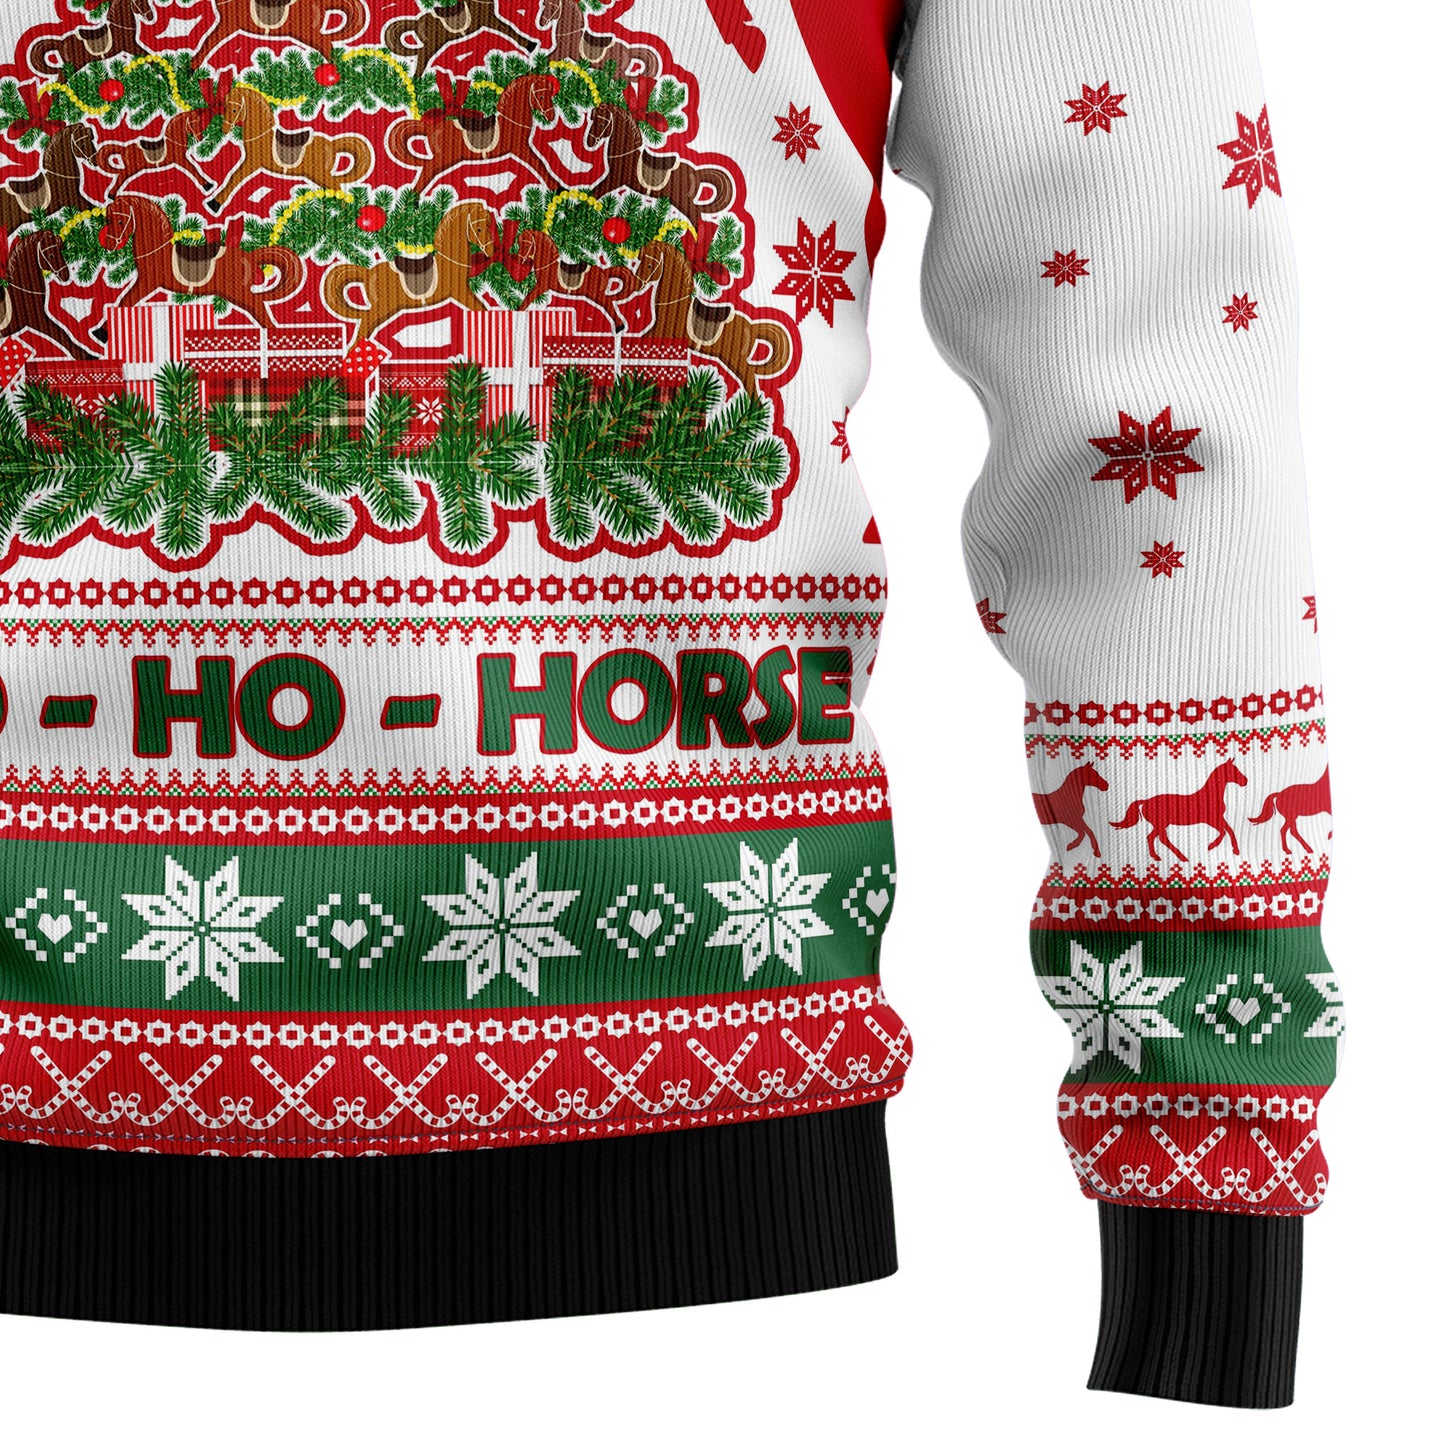 Horse Christmas Tree TY249 Ugly Christmas Sweater